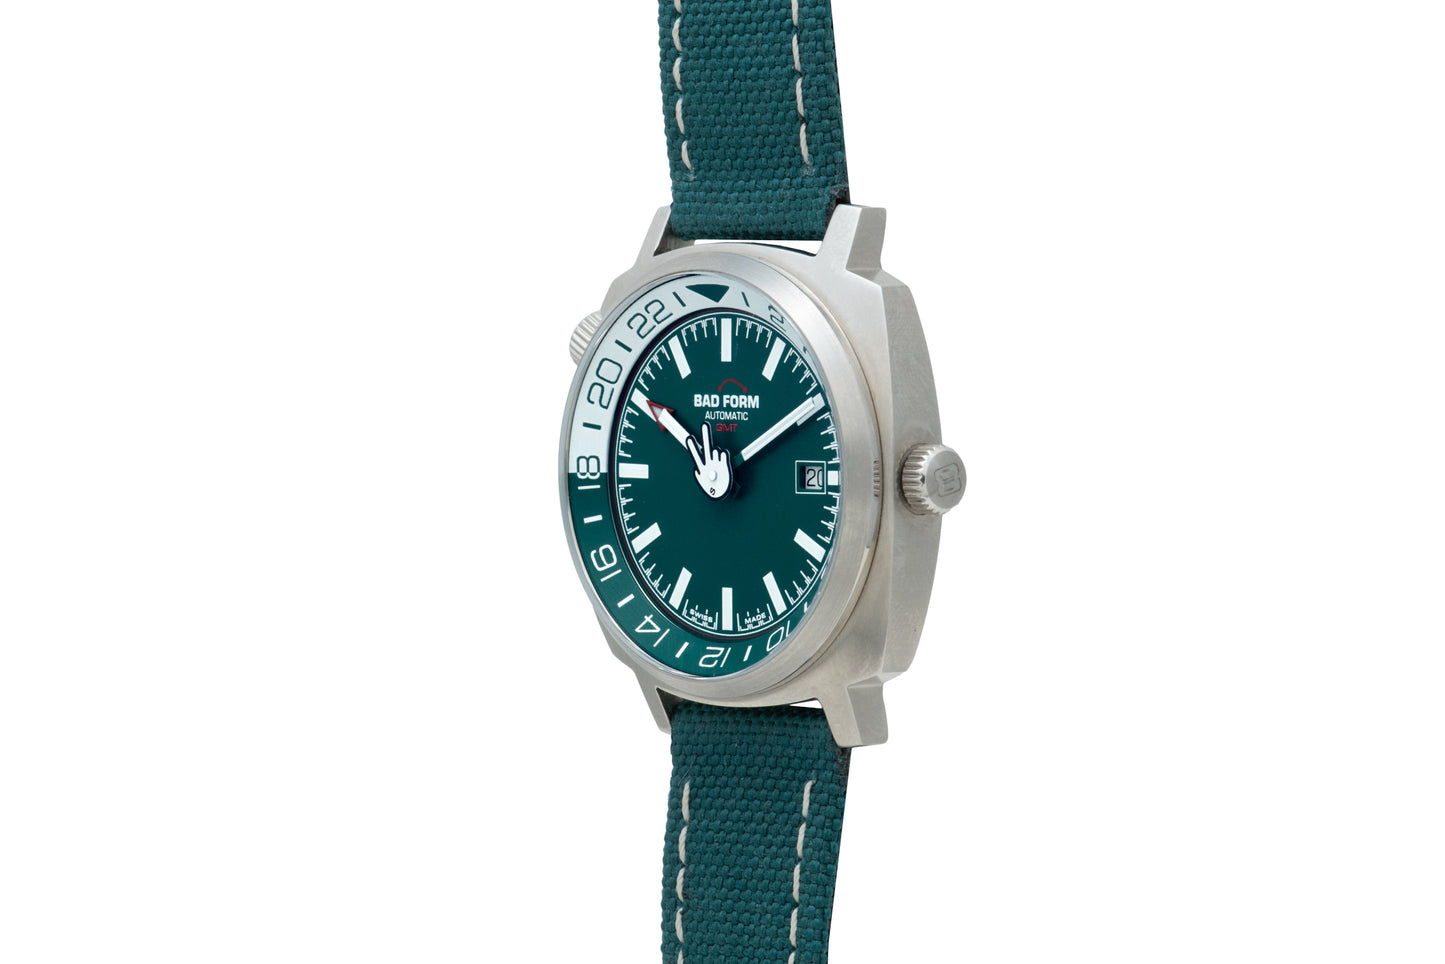 Bamford X seconde/seconde/ 'Bad Form' GMT Limited Edition